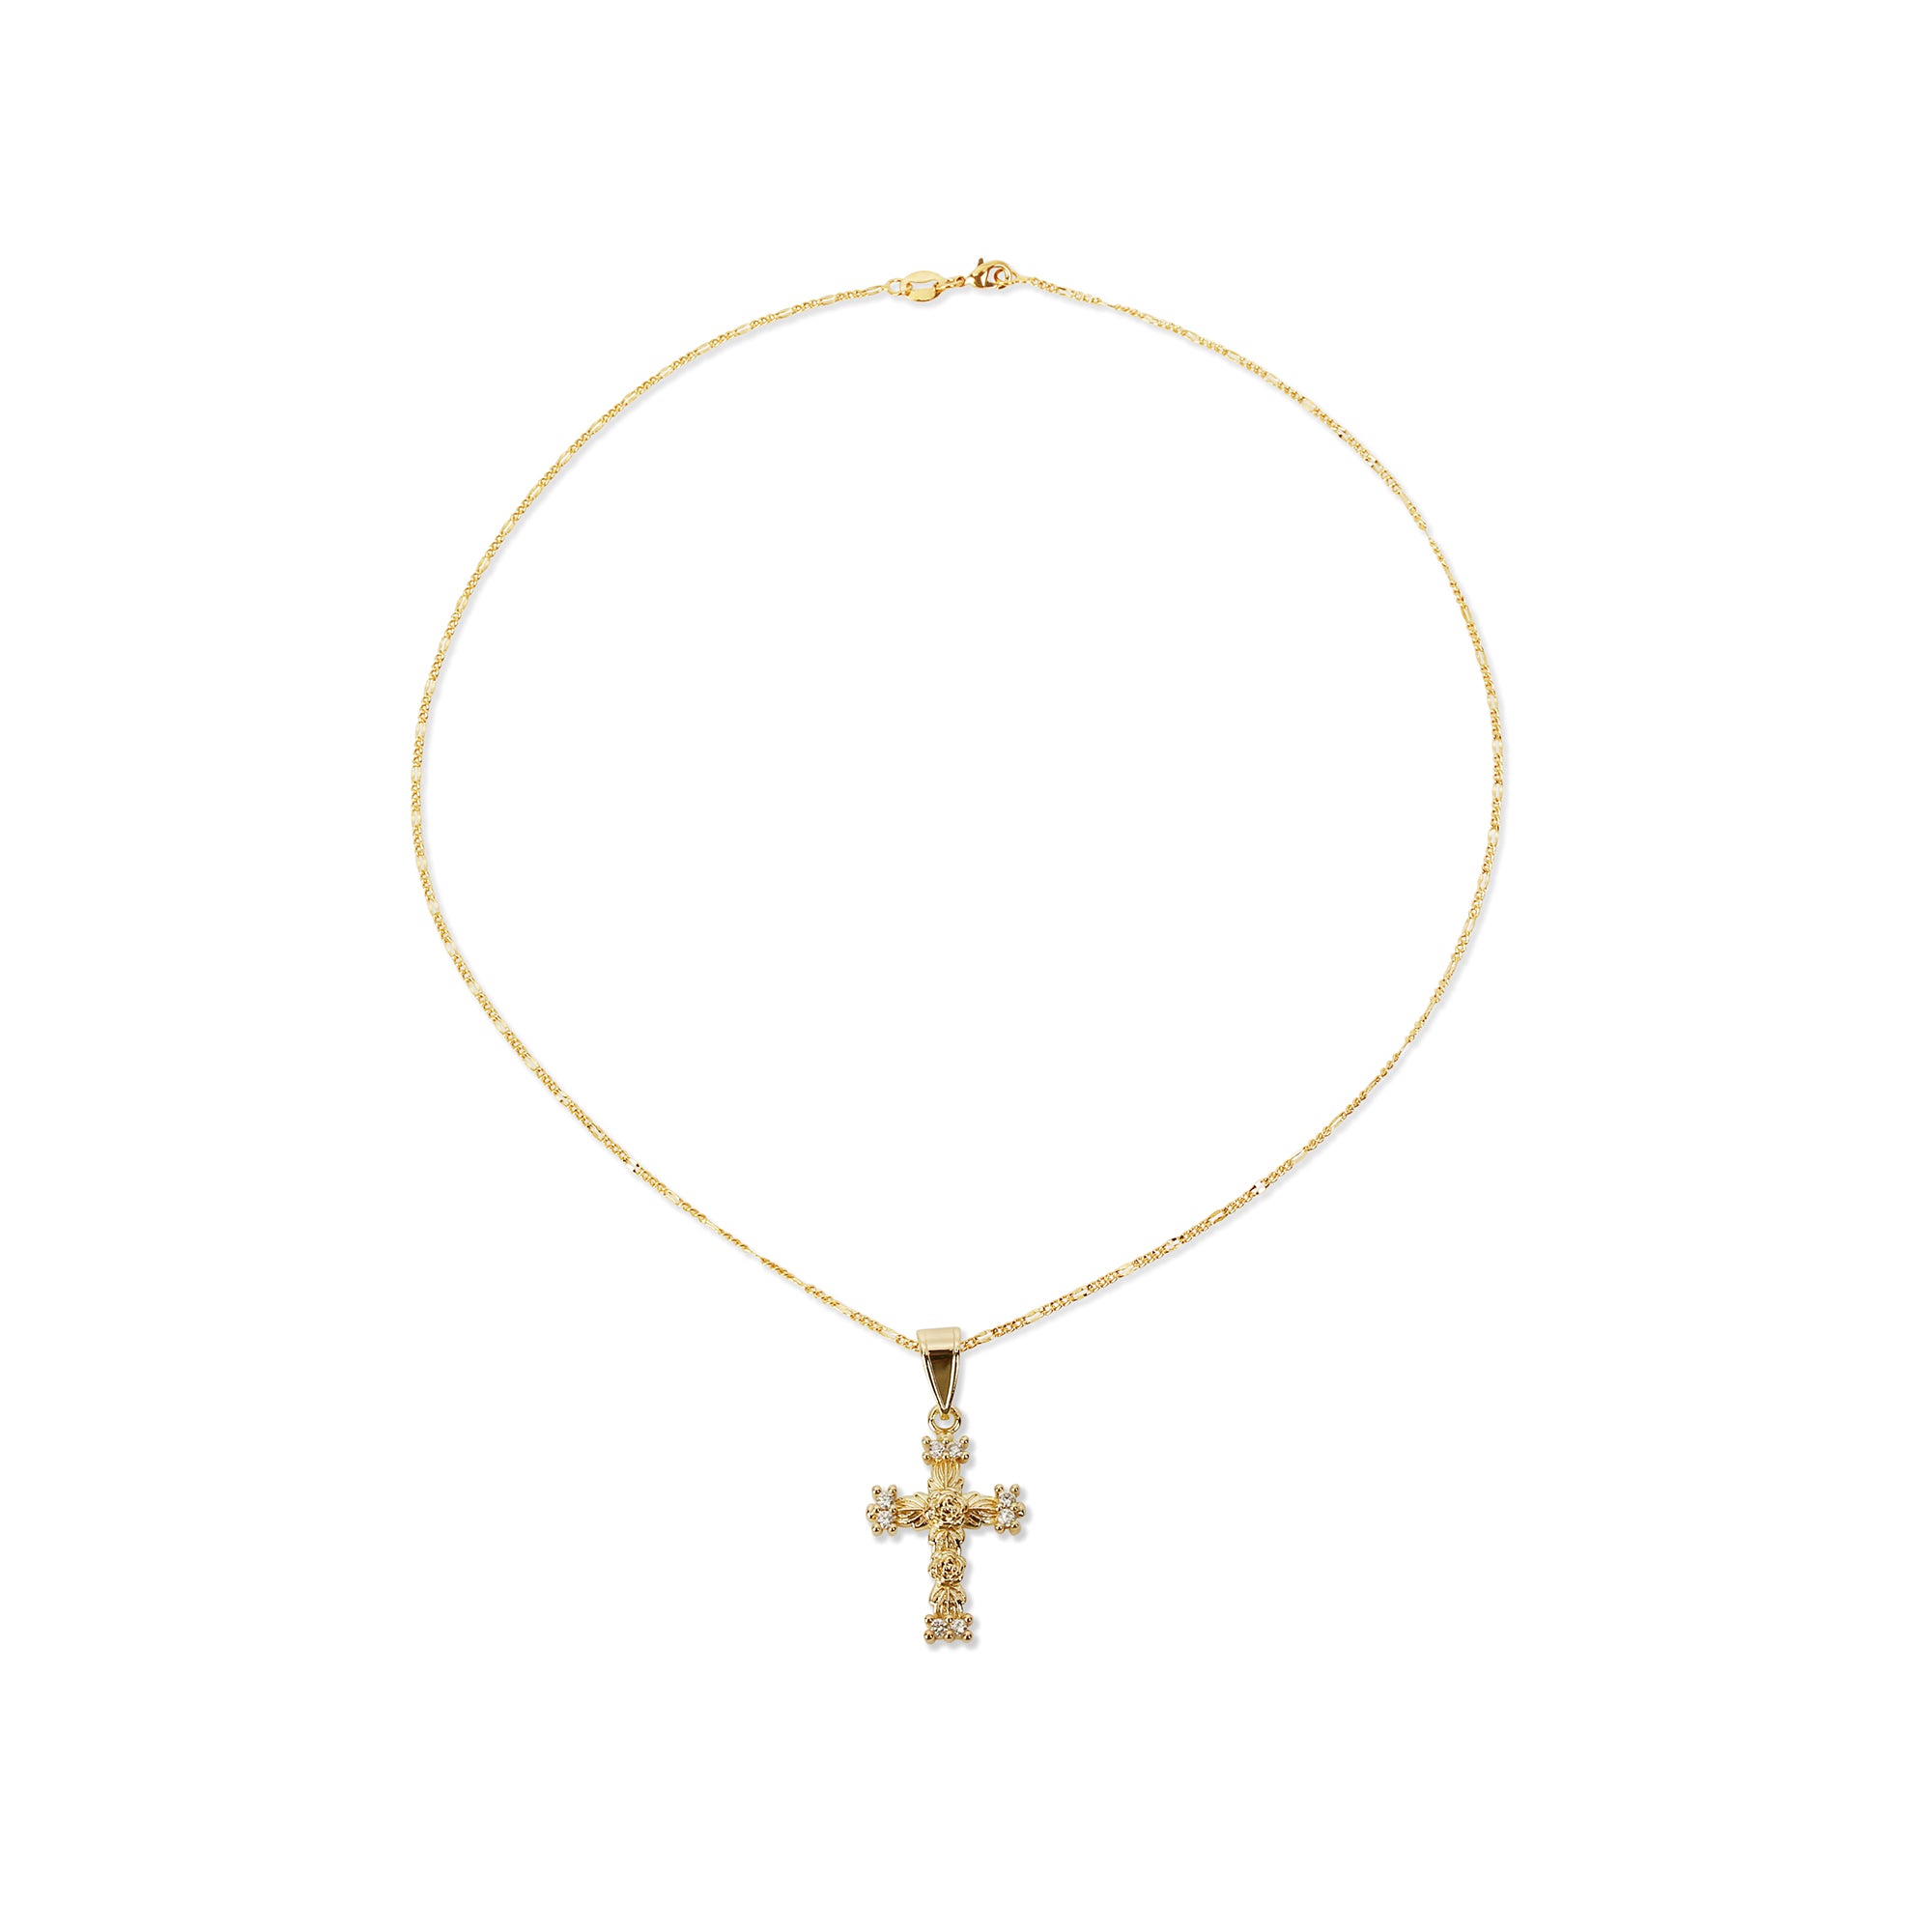 Rose Cross Pendant Necklace - The M Jewelers